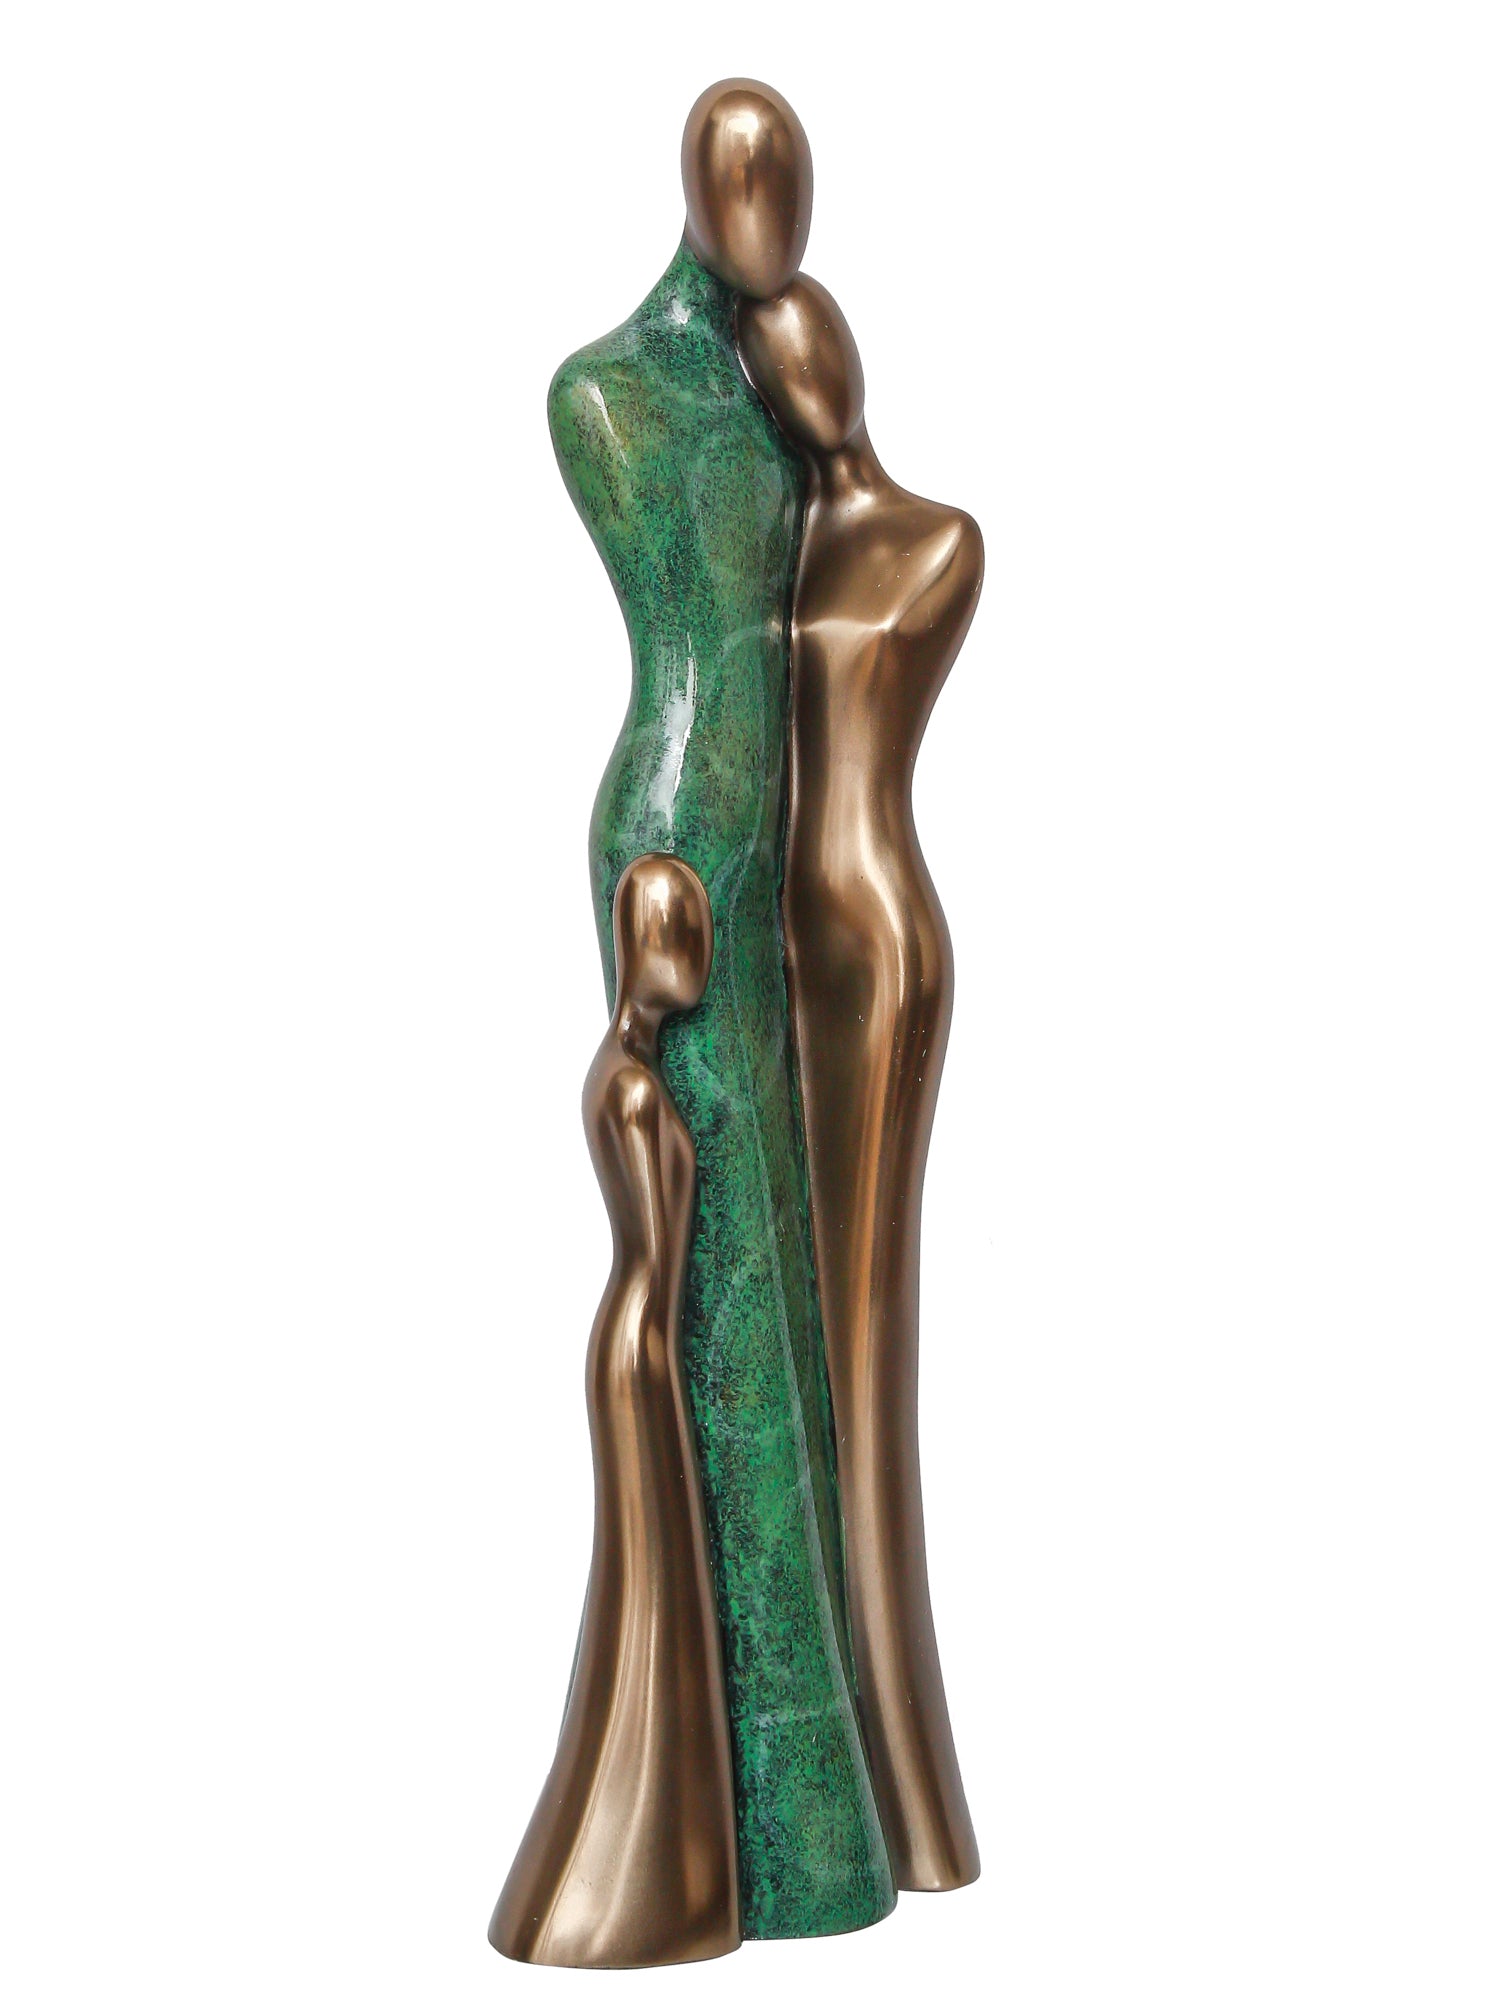 Polyresin and Bronze Family of Mother, Daughter and Grand Daughter Human Figurine Decorative Showpiece (Green and Brown) 4